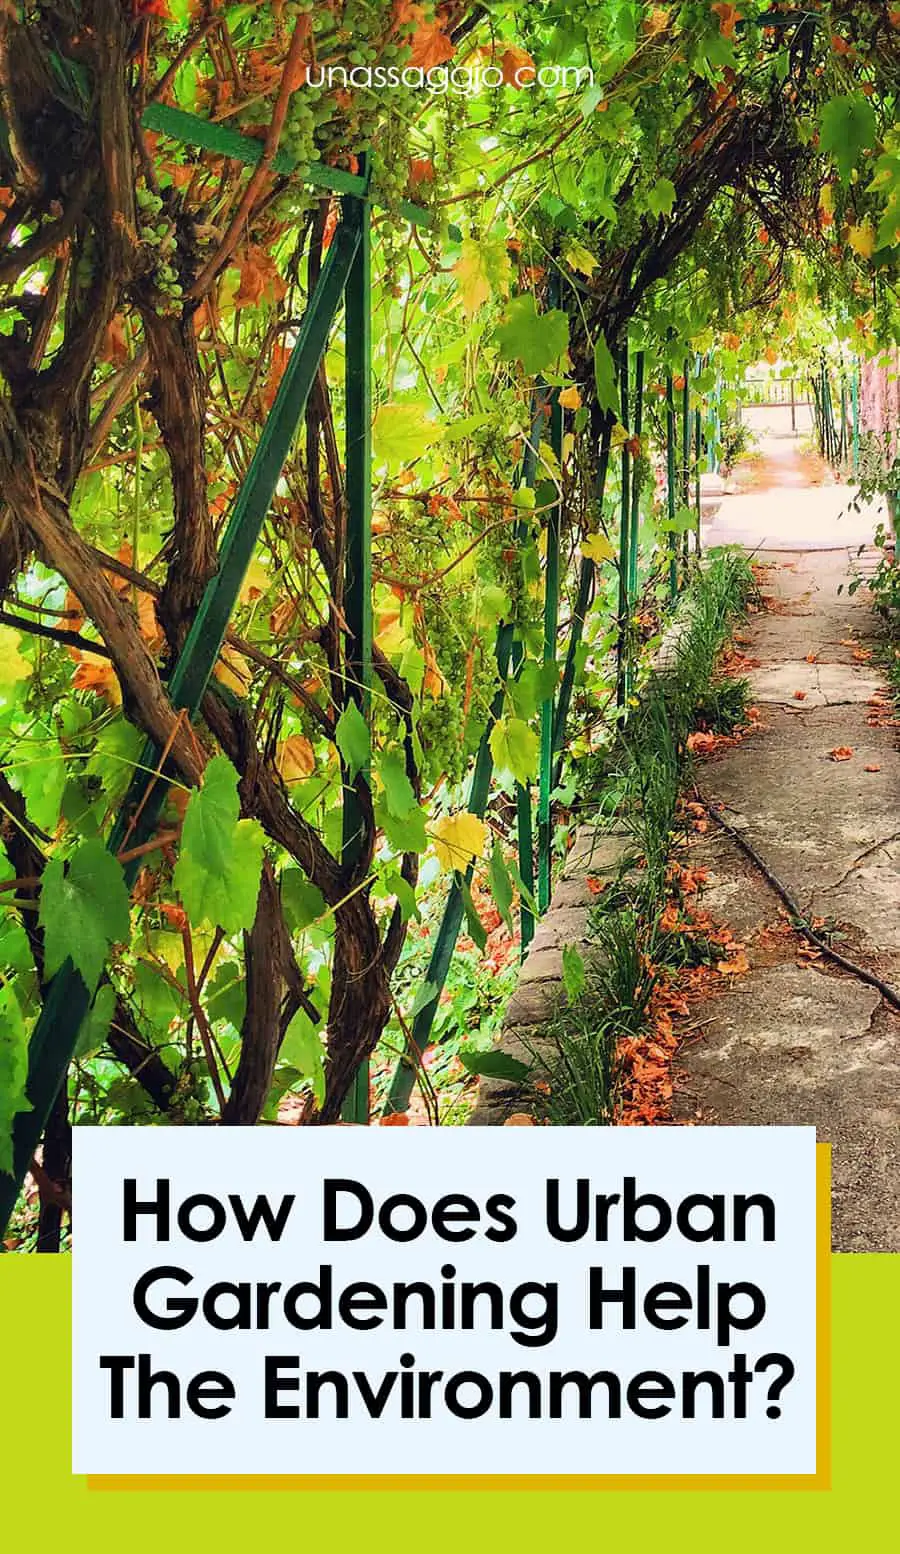 How Does Urban Gardening Help The Environment?